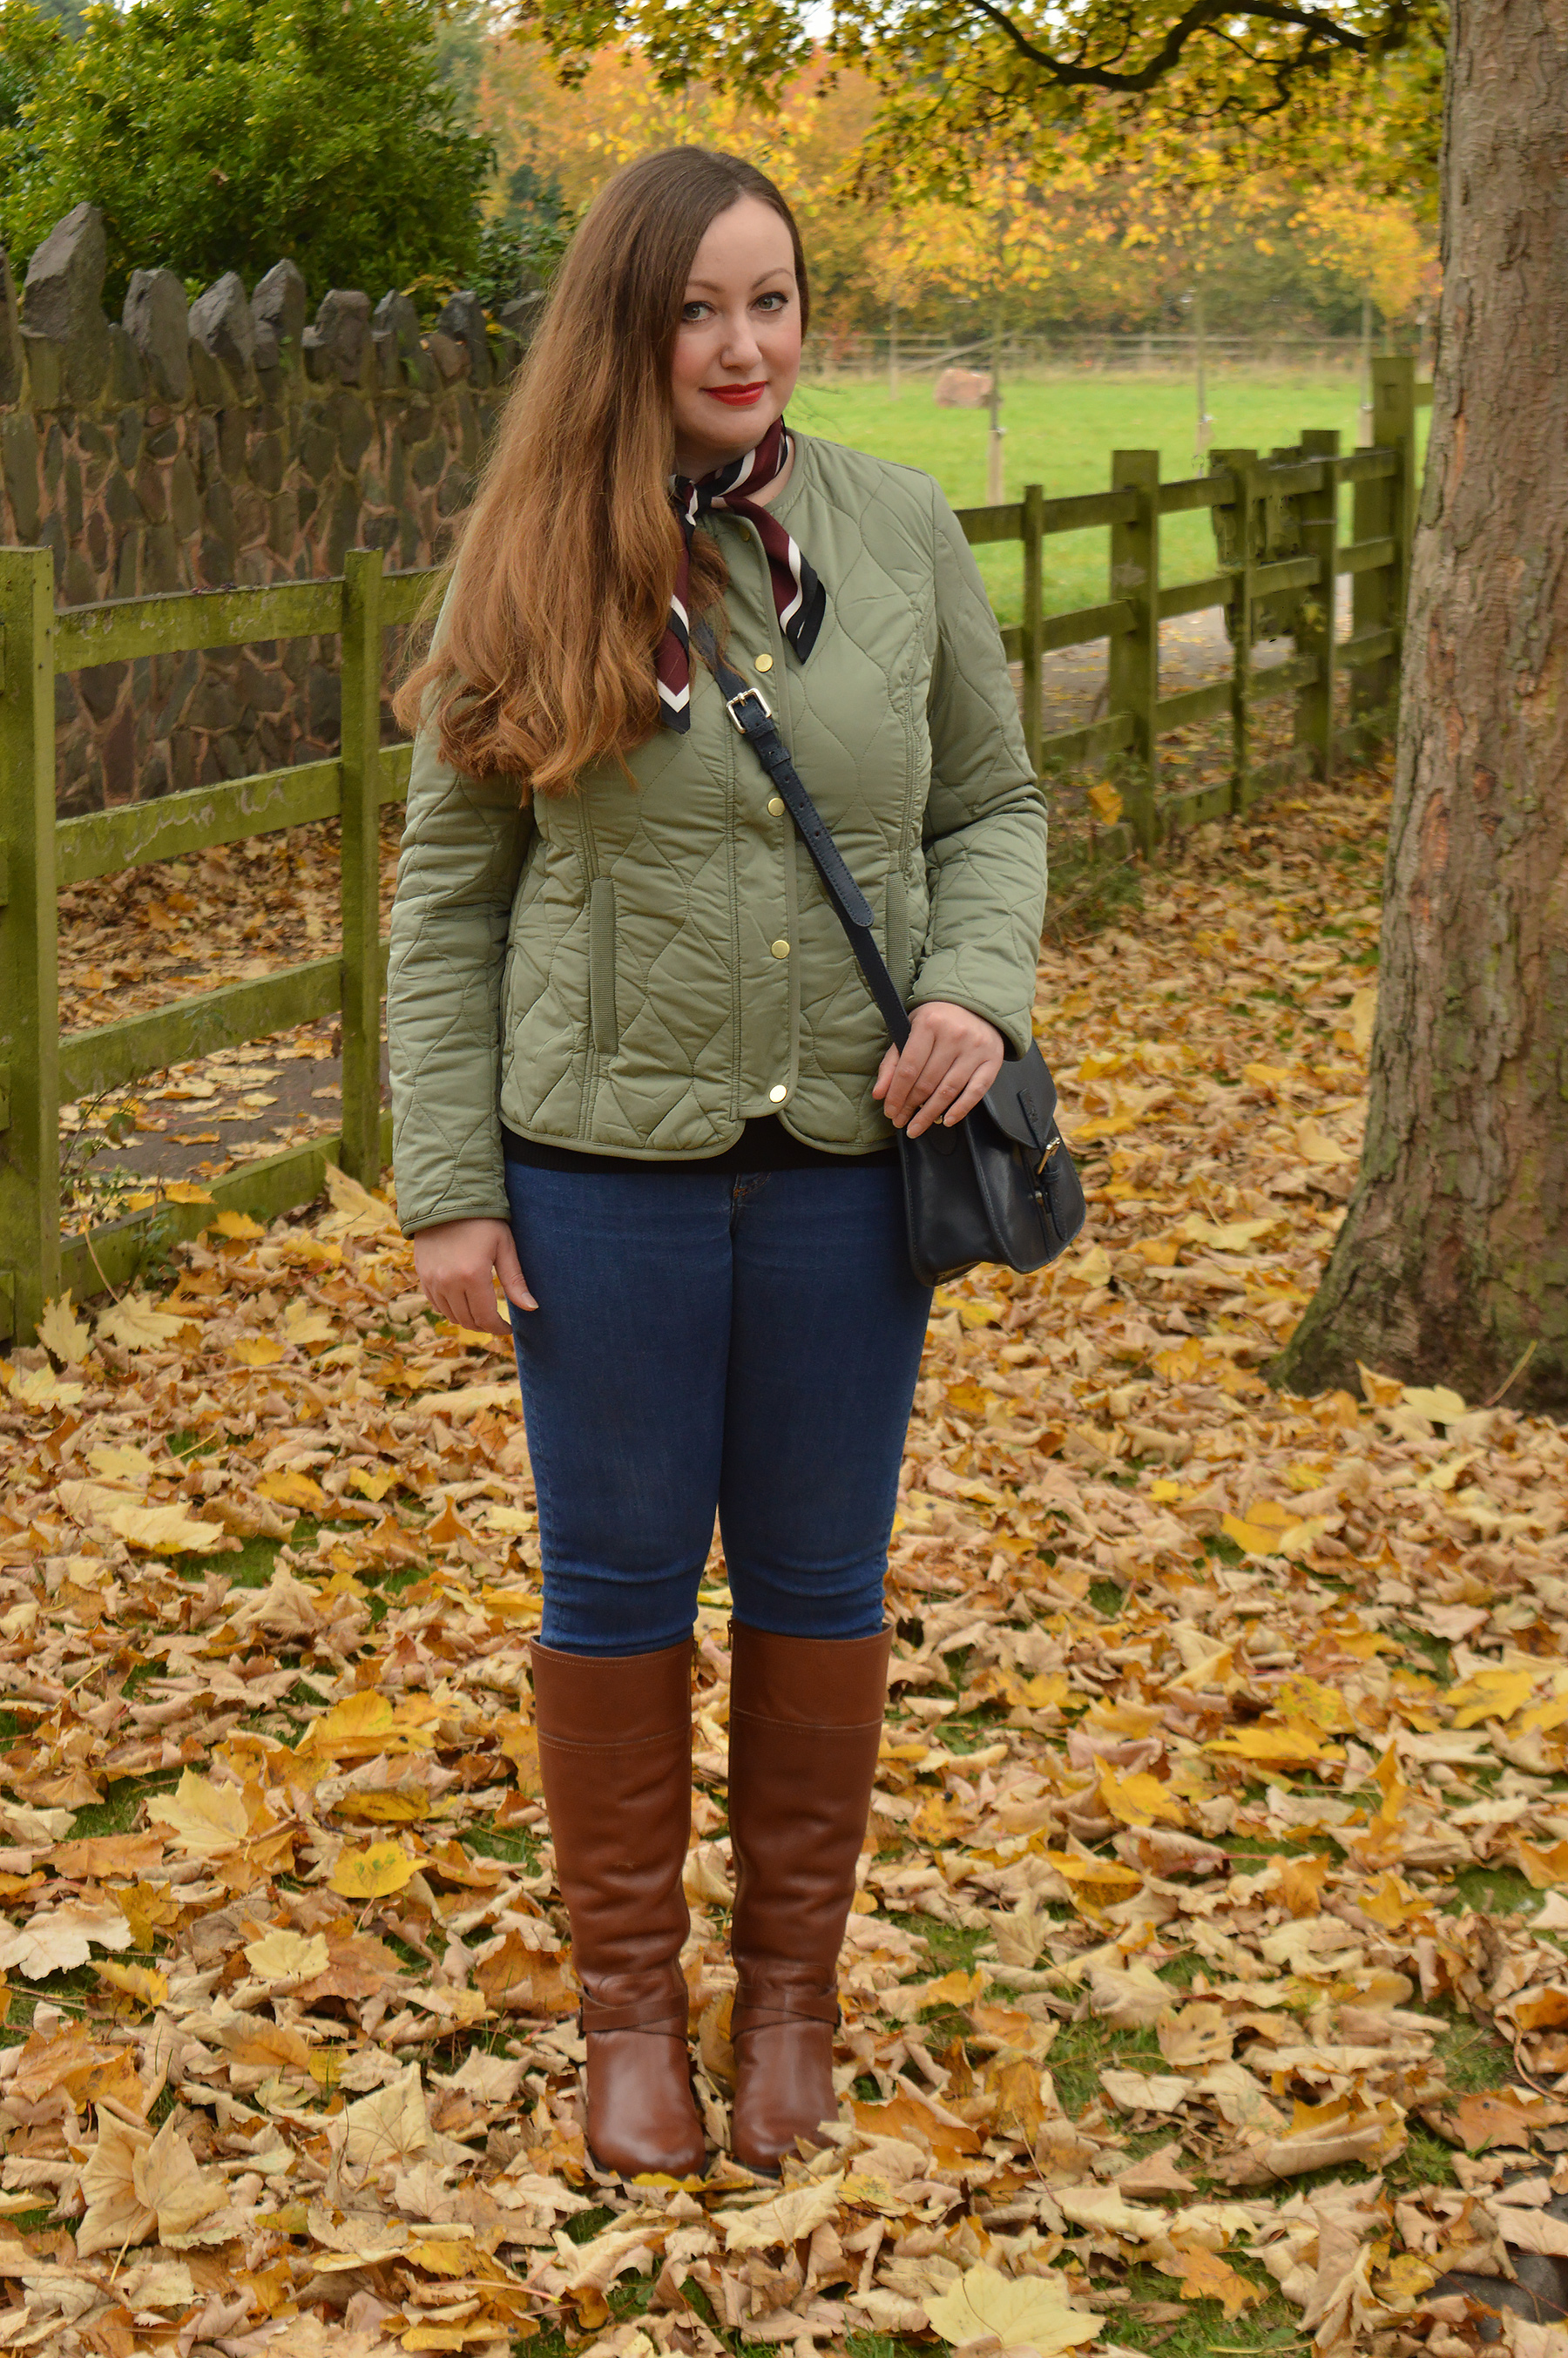 Equestrian Style Outfit